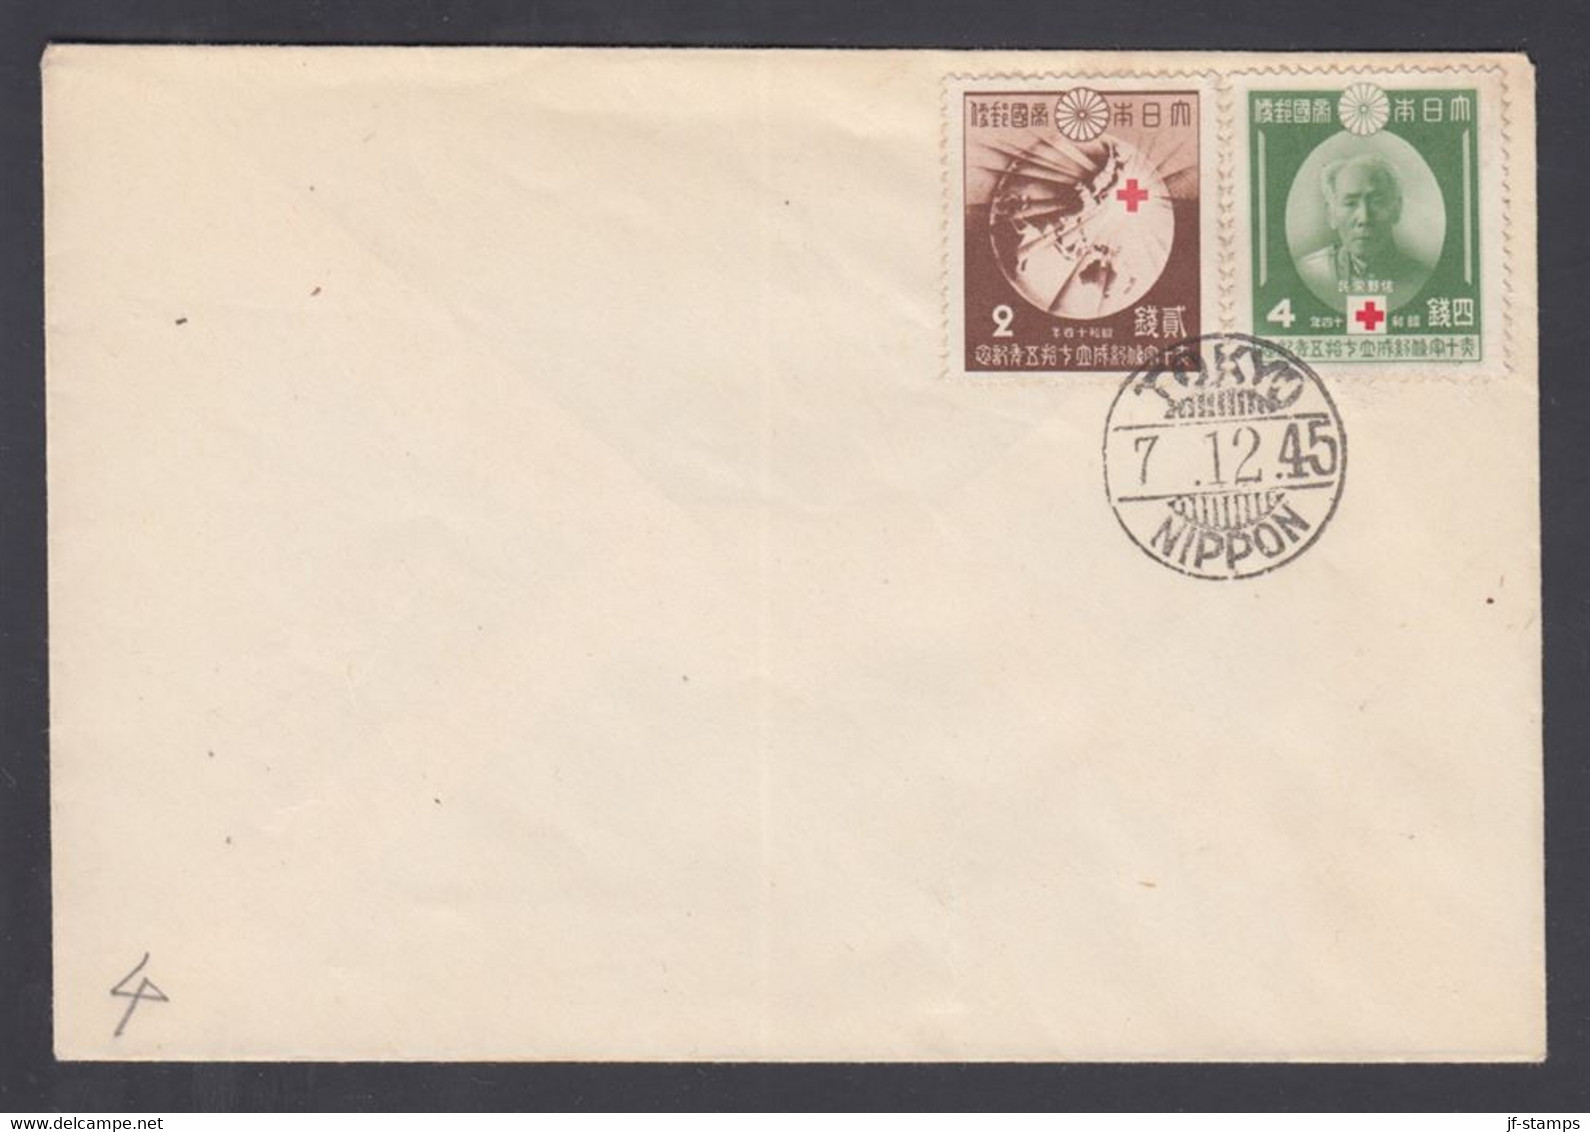 1945. JAPAN  12 + 4 RED CROSS Cancelled TOKIO NIPPON 7.12.45. (Michel 284-285) - JF367904 - Lettres & Documents